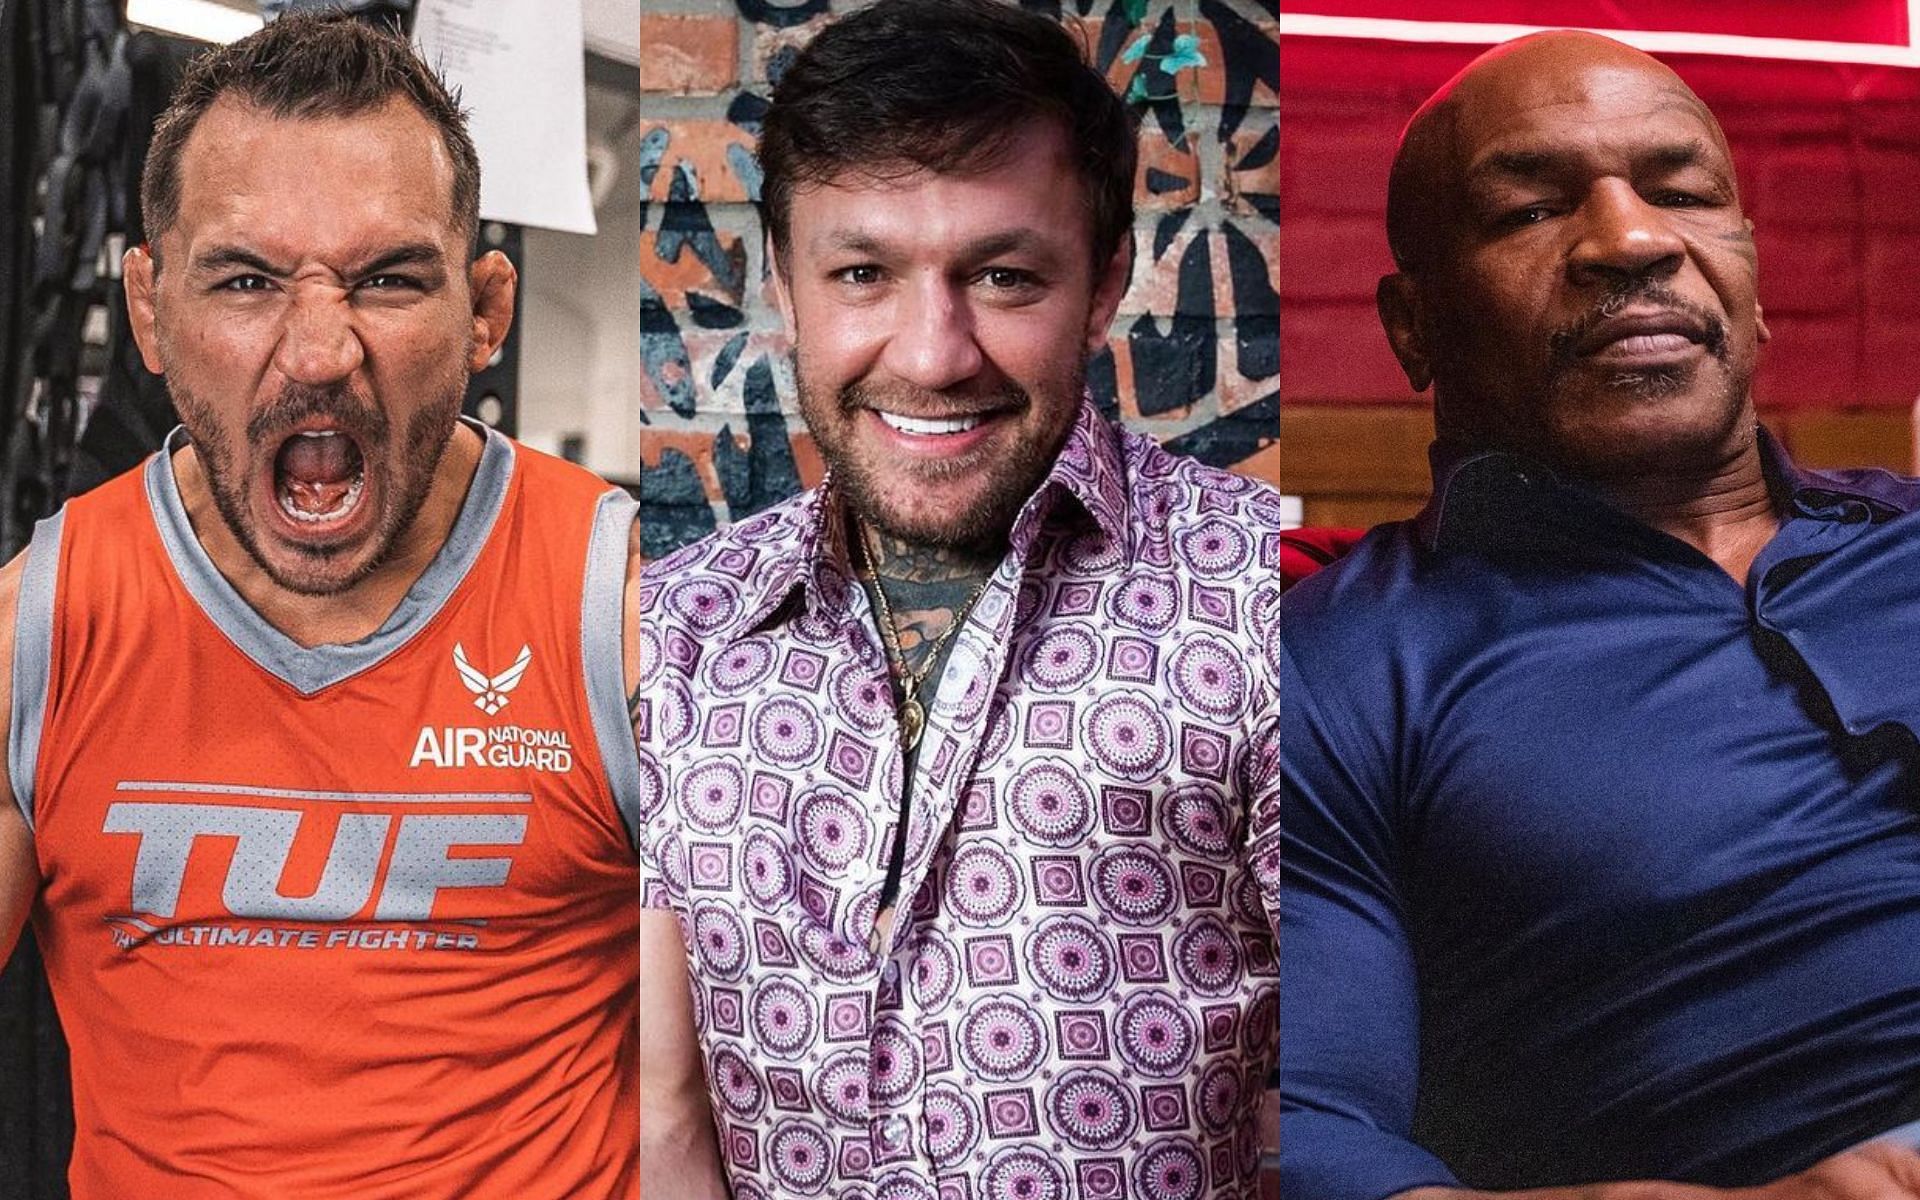 (L to R) Michael Chandler, Conor McGregor, Mike Tyson [Image courtesy: @mikechandlermma, @thenotoriousmma, @miketyson on Instagram]